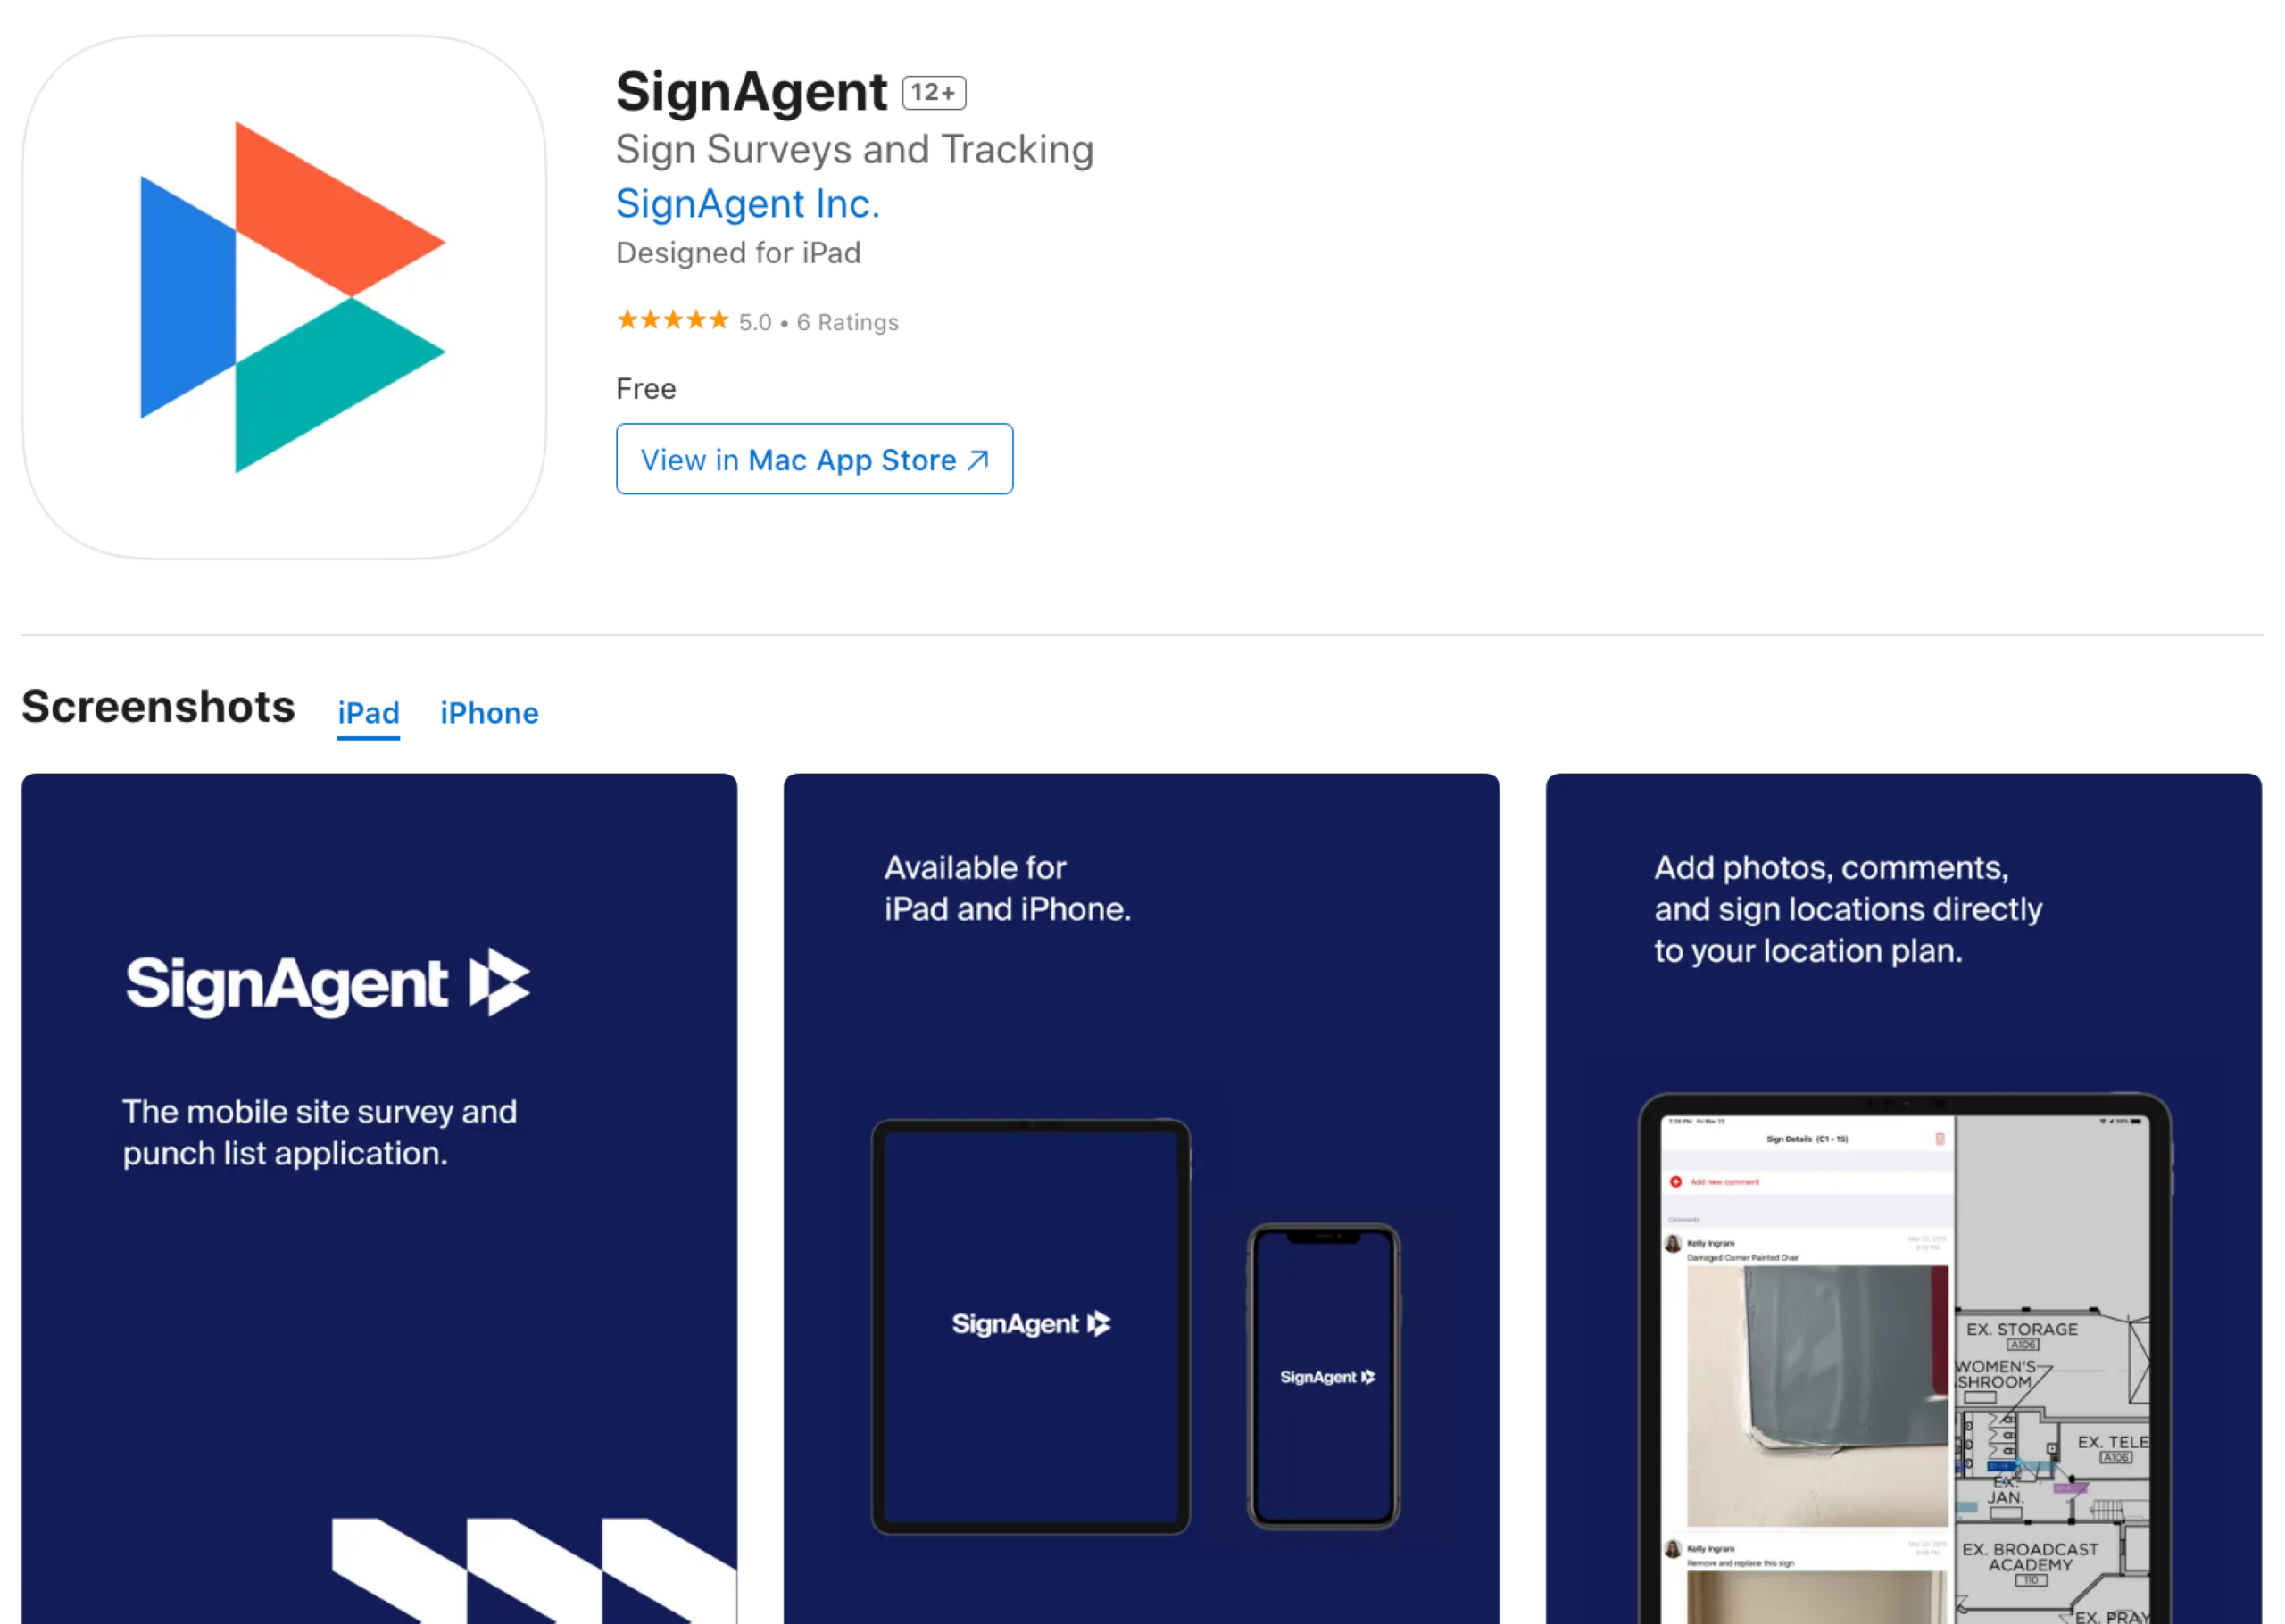 Appstore screenshot featuring SignAgent's Mobile App